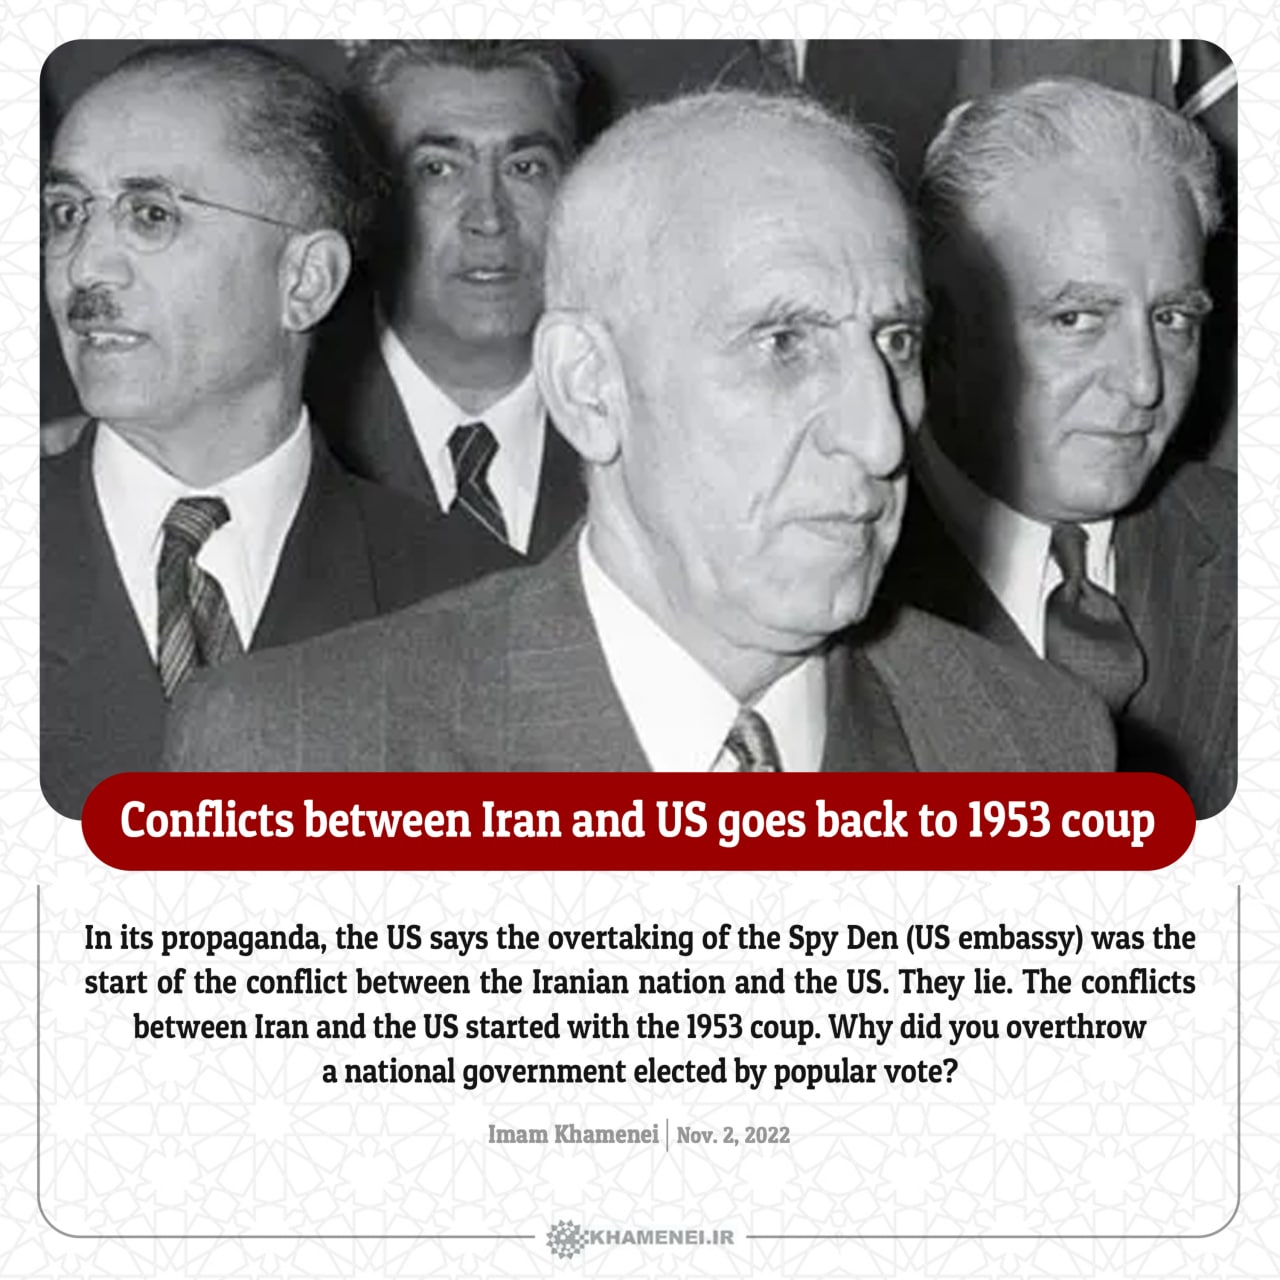 Conflicts between Iran and US goes back to 1953 coup